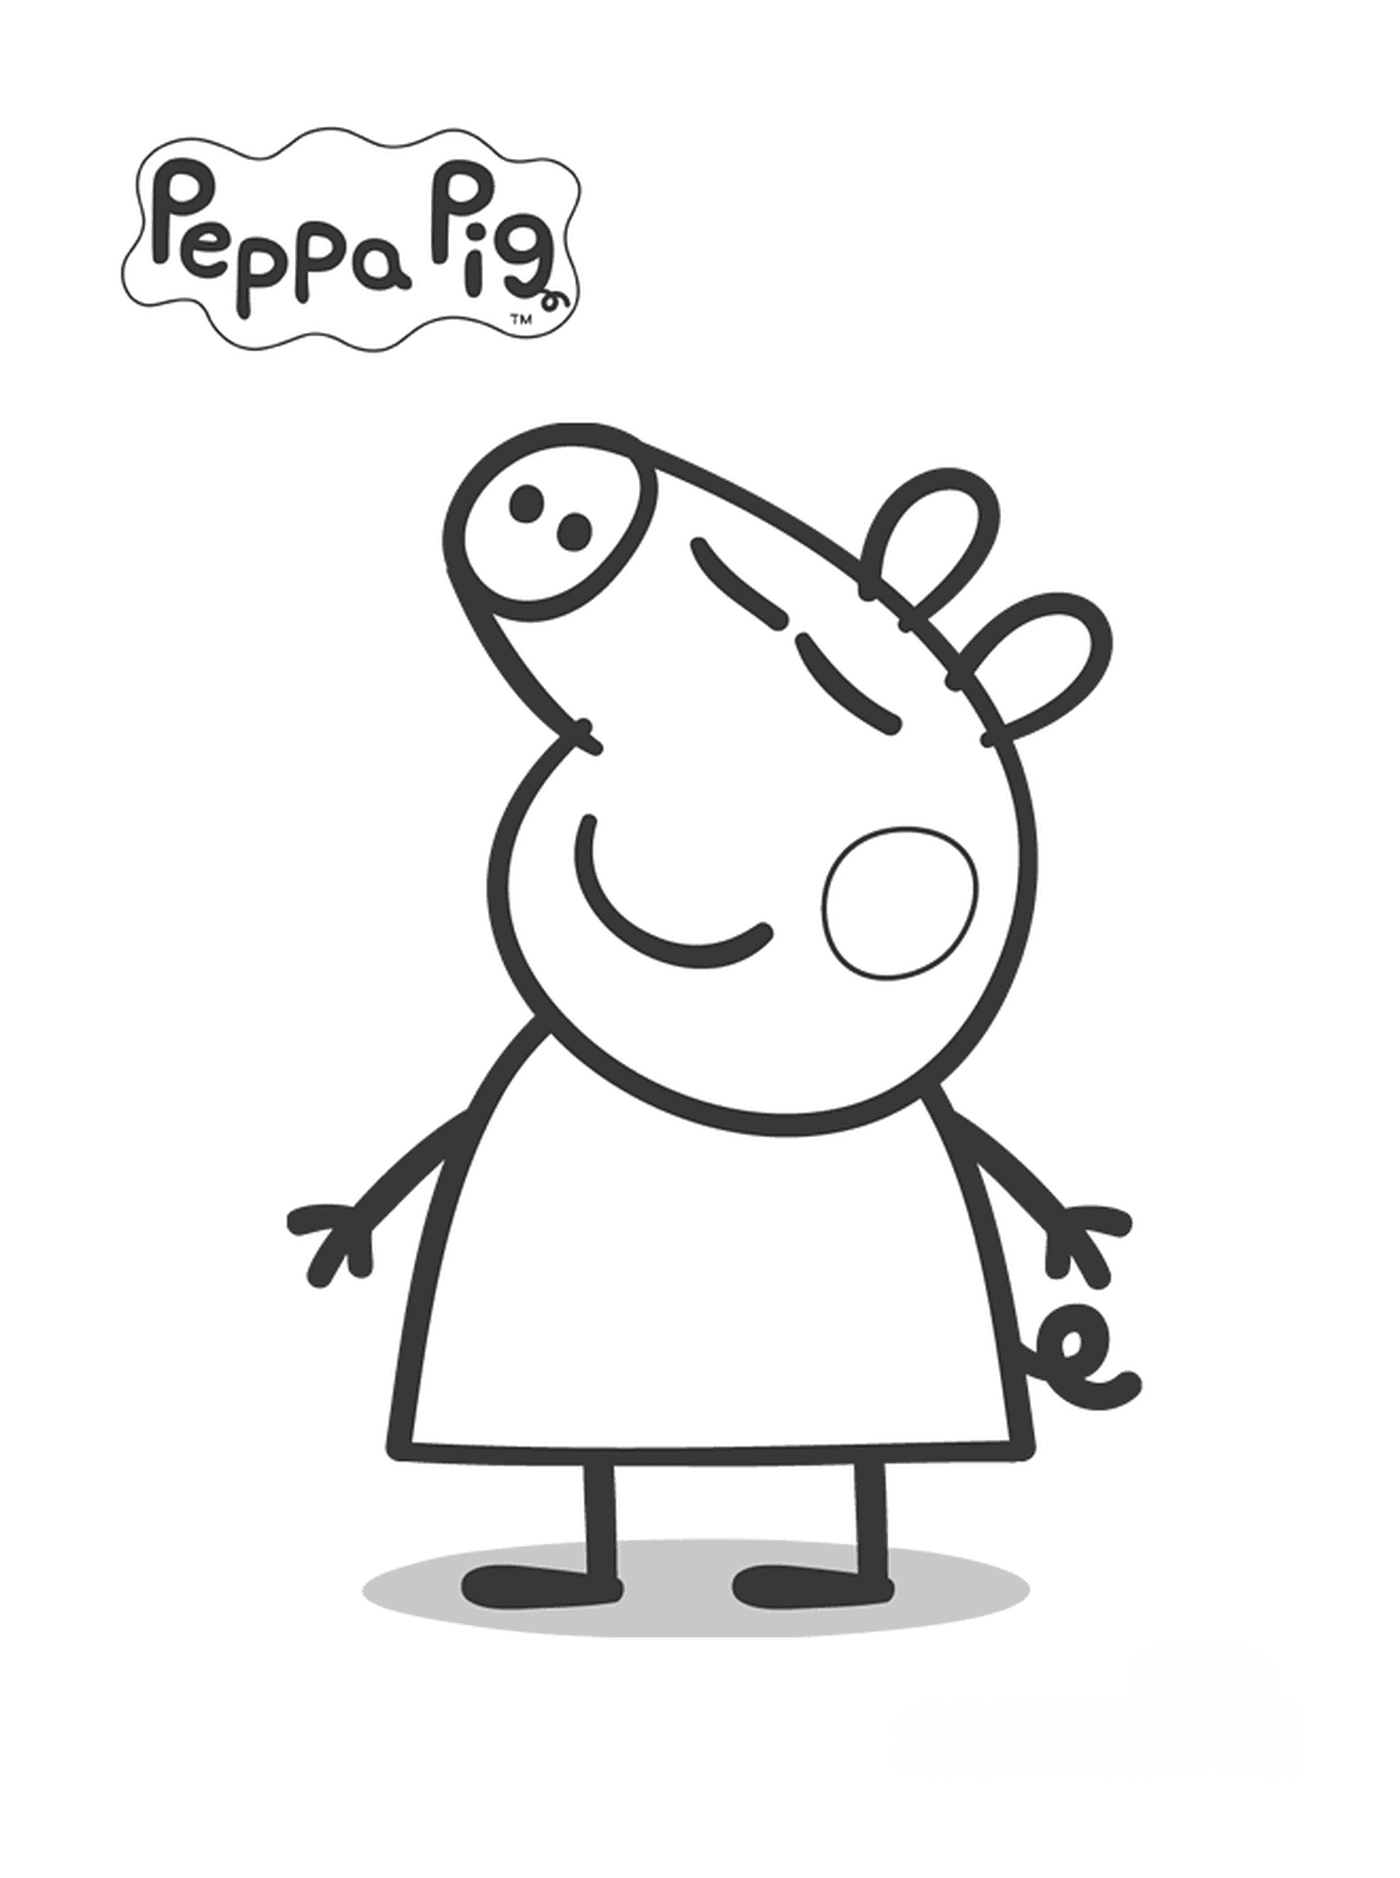  Peppa Pig with a bubble of thought above 